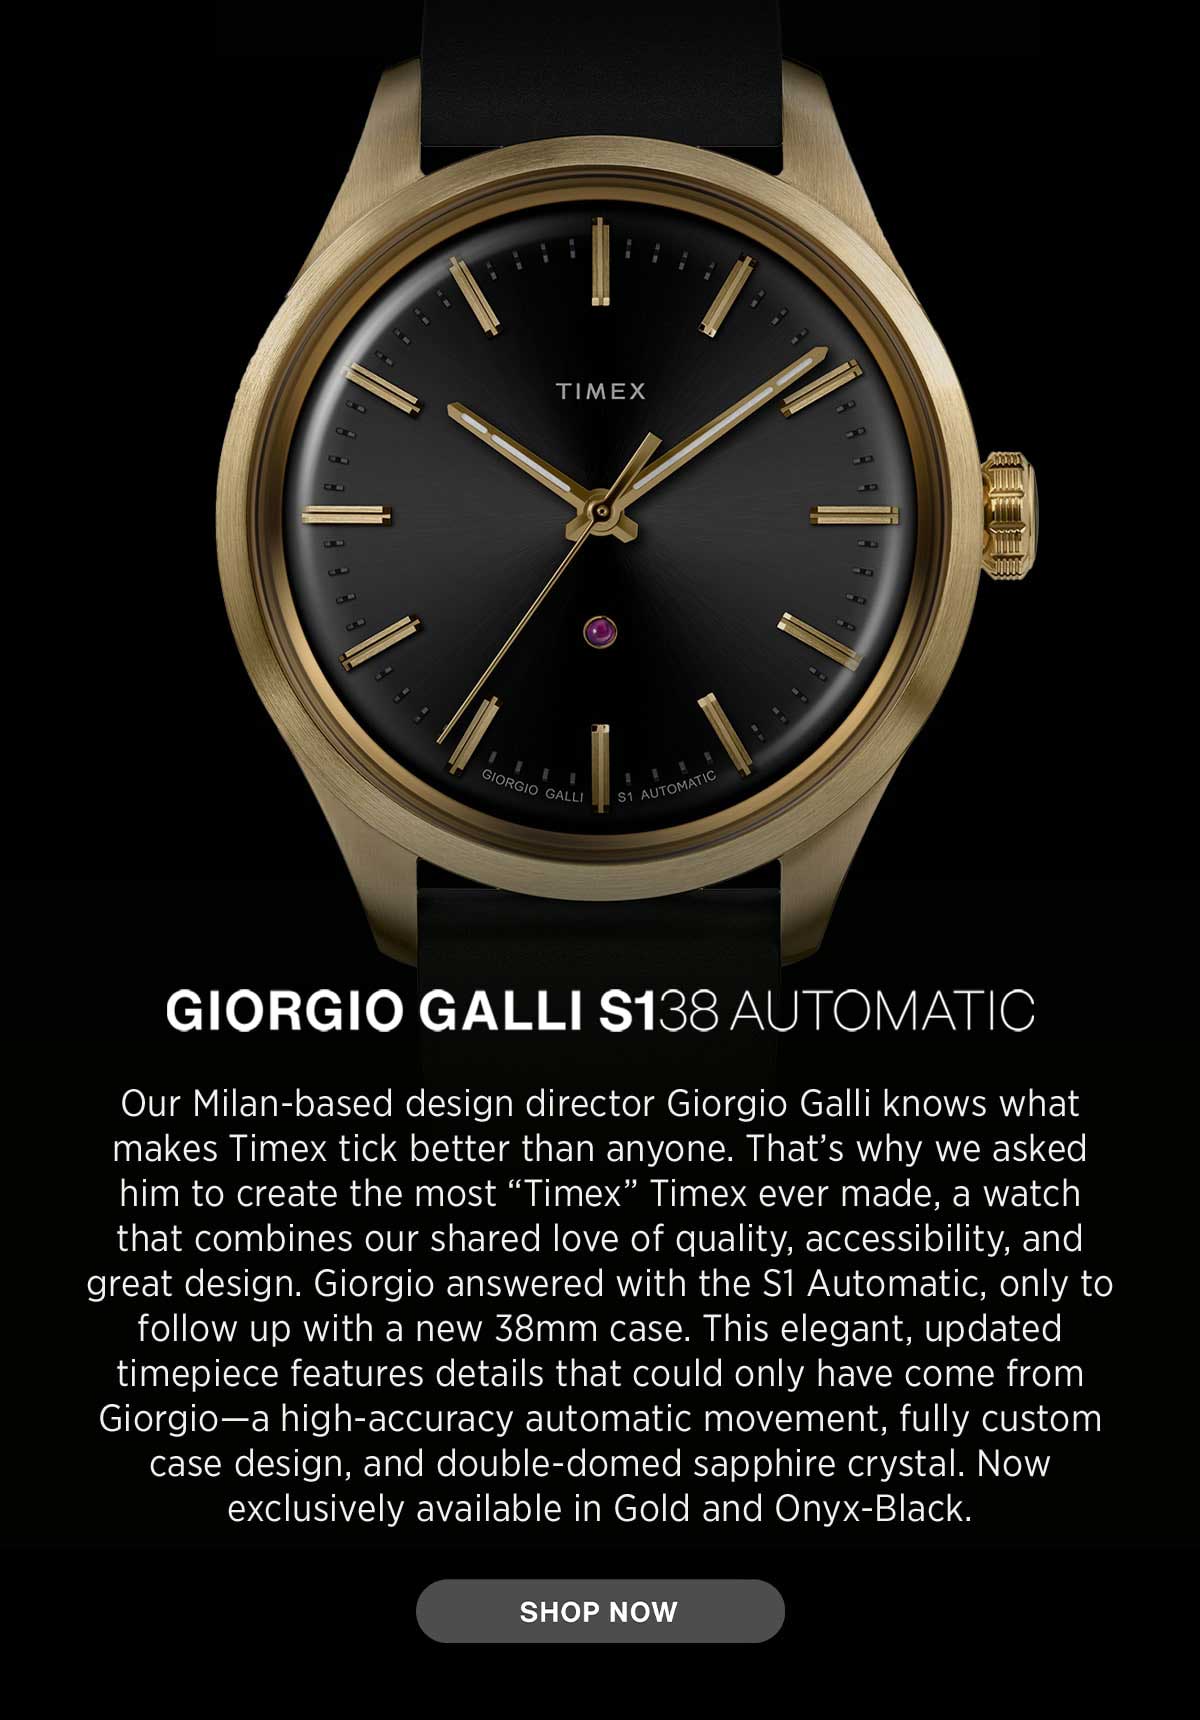 GIORGIO GALLI S138 AUTOMATIC | Our Milan-based design director Giorgio Galli knows what makes Timex tick better than anyone. That's why we asked him to create the most 'Timex' Timex ever made, a watch that combines our shared love of quality, accessibility, and great design. Giorgio answered with the S1 Automatic, only to follow up with a new 38 mm case. This elegant, updated timepiece features details that could only have come from Giorgio-a high-accuracy automatic movement, fully custom case design, and double-domed sapphire crystal. Now exclusively available in Gold and Onyx-Black. | SHOP NOW